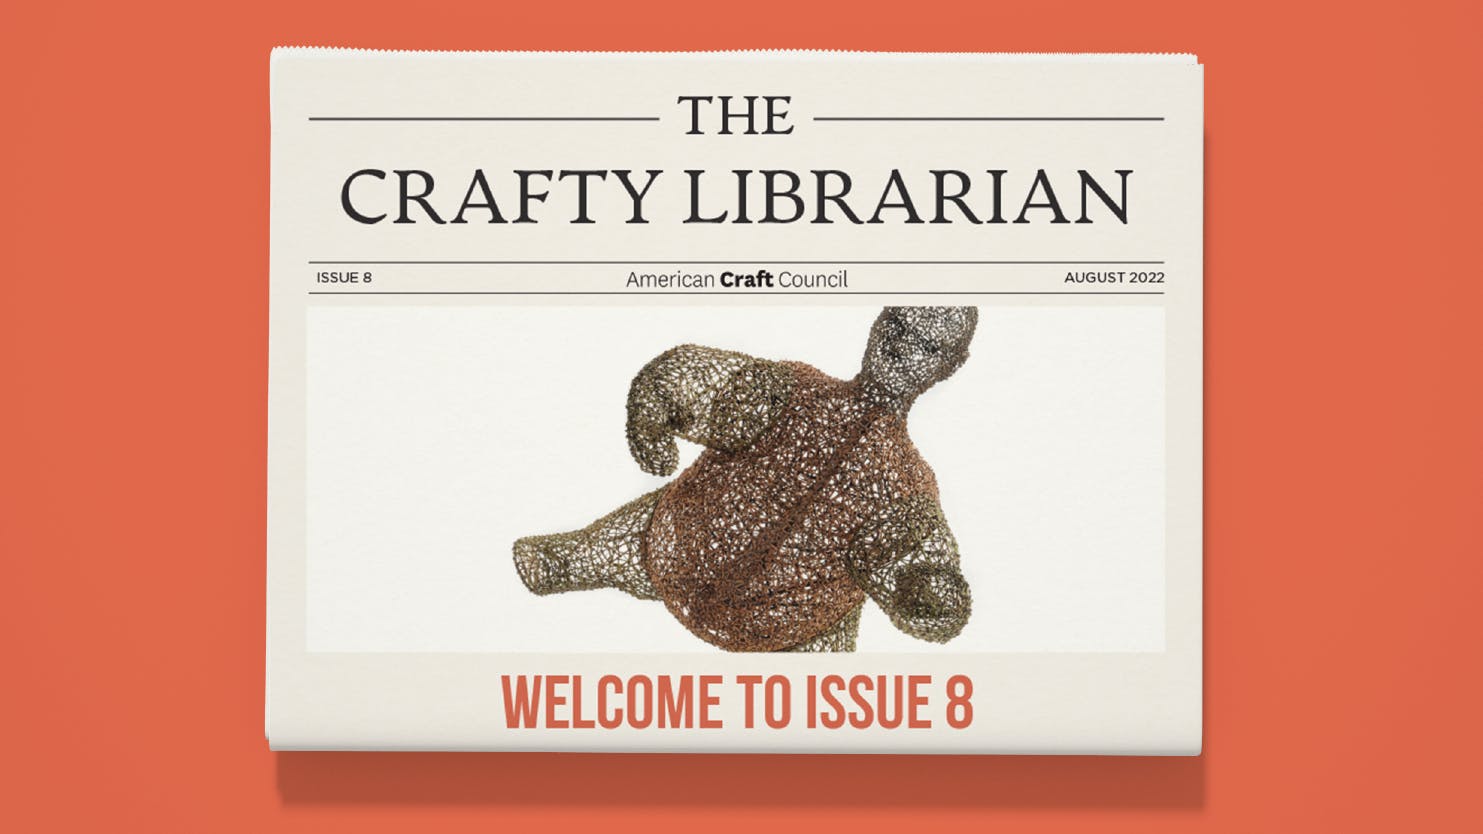 The Crafty Librarian Issue 08 Summer 2022